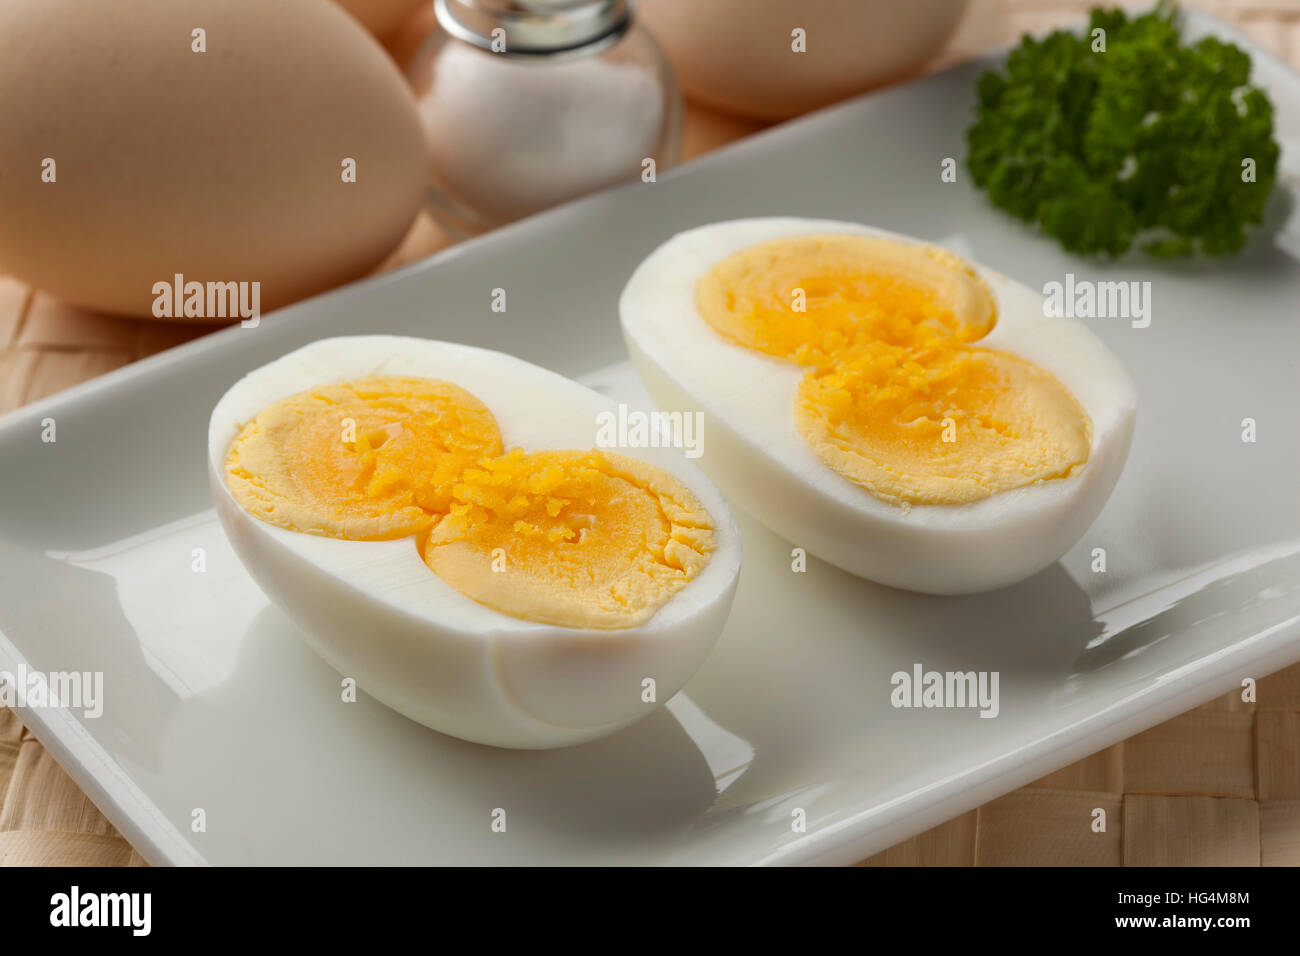 Cooked double yolk egg on a dish Stock Photo